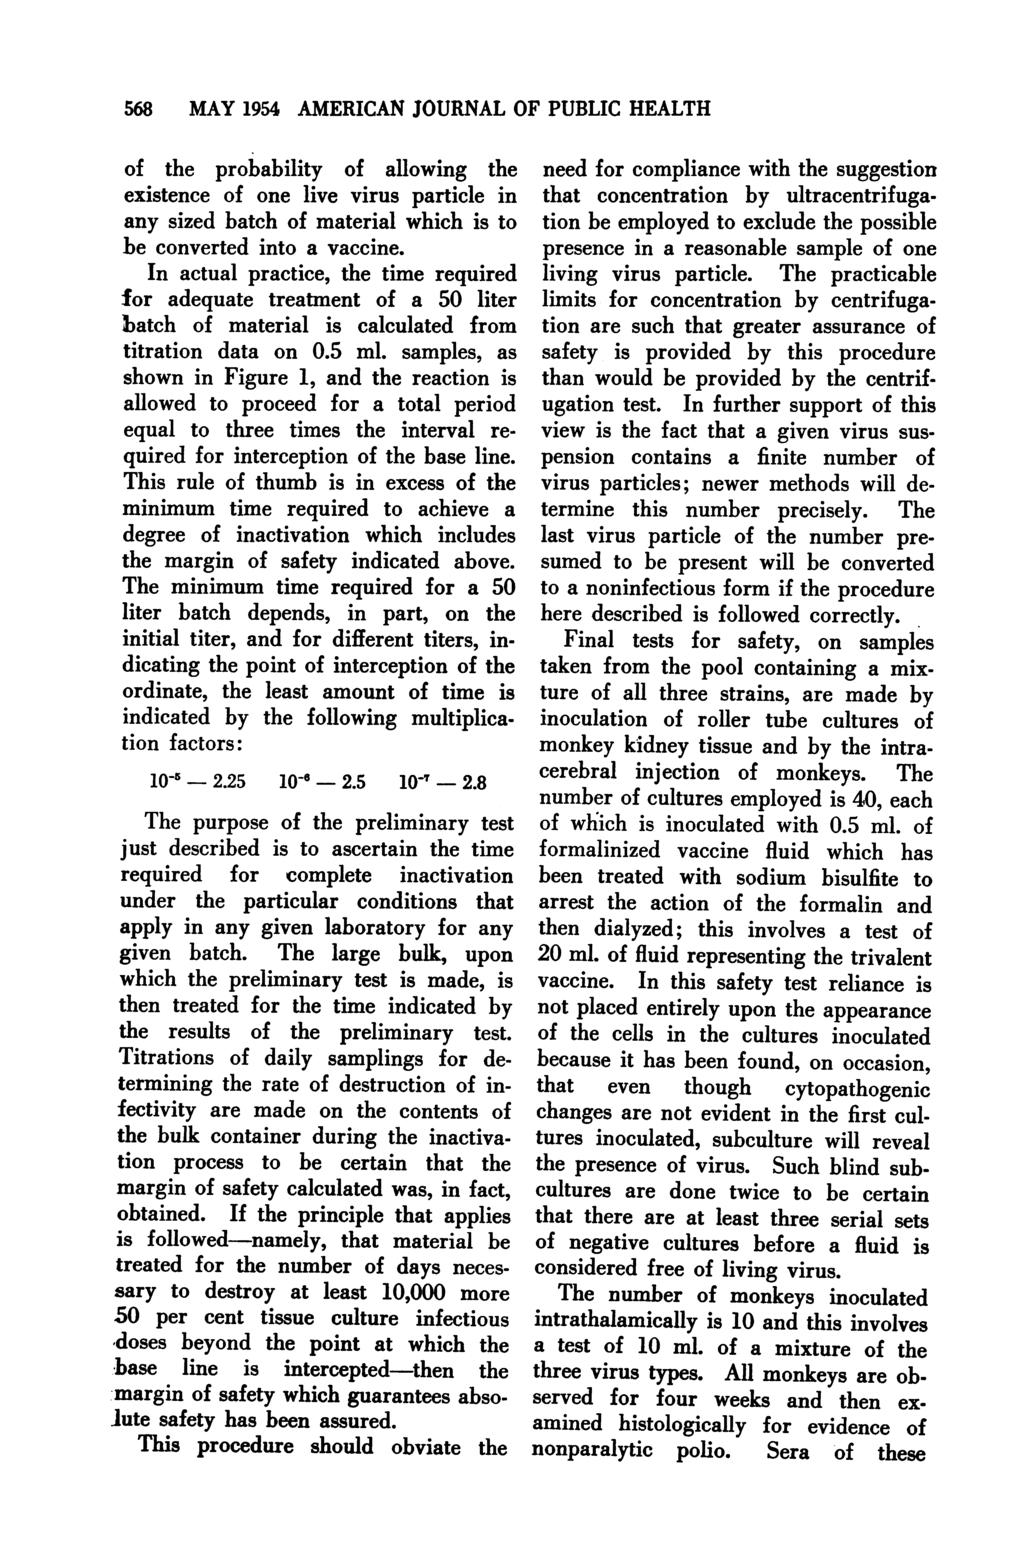 568 MAY 1954 AMERICAN JOURNAL OF PUBLIC HEALTH of the probability of allowing the existence of one live virus particle in any sized batch of material which is to be converted into a vaccine.